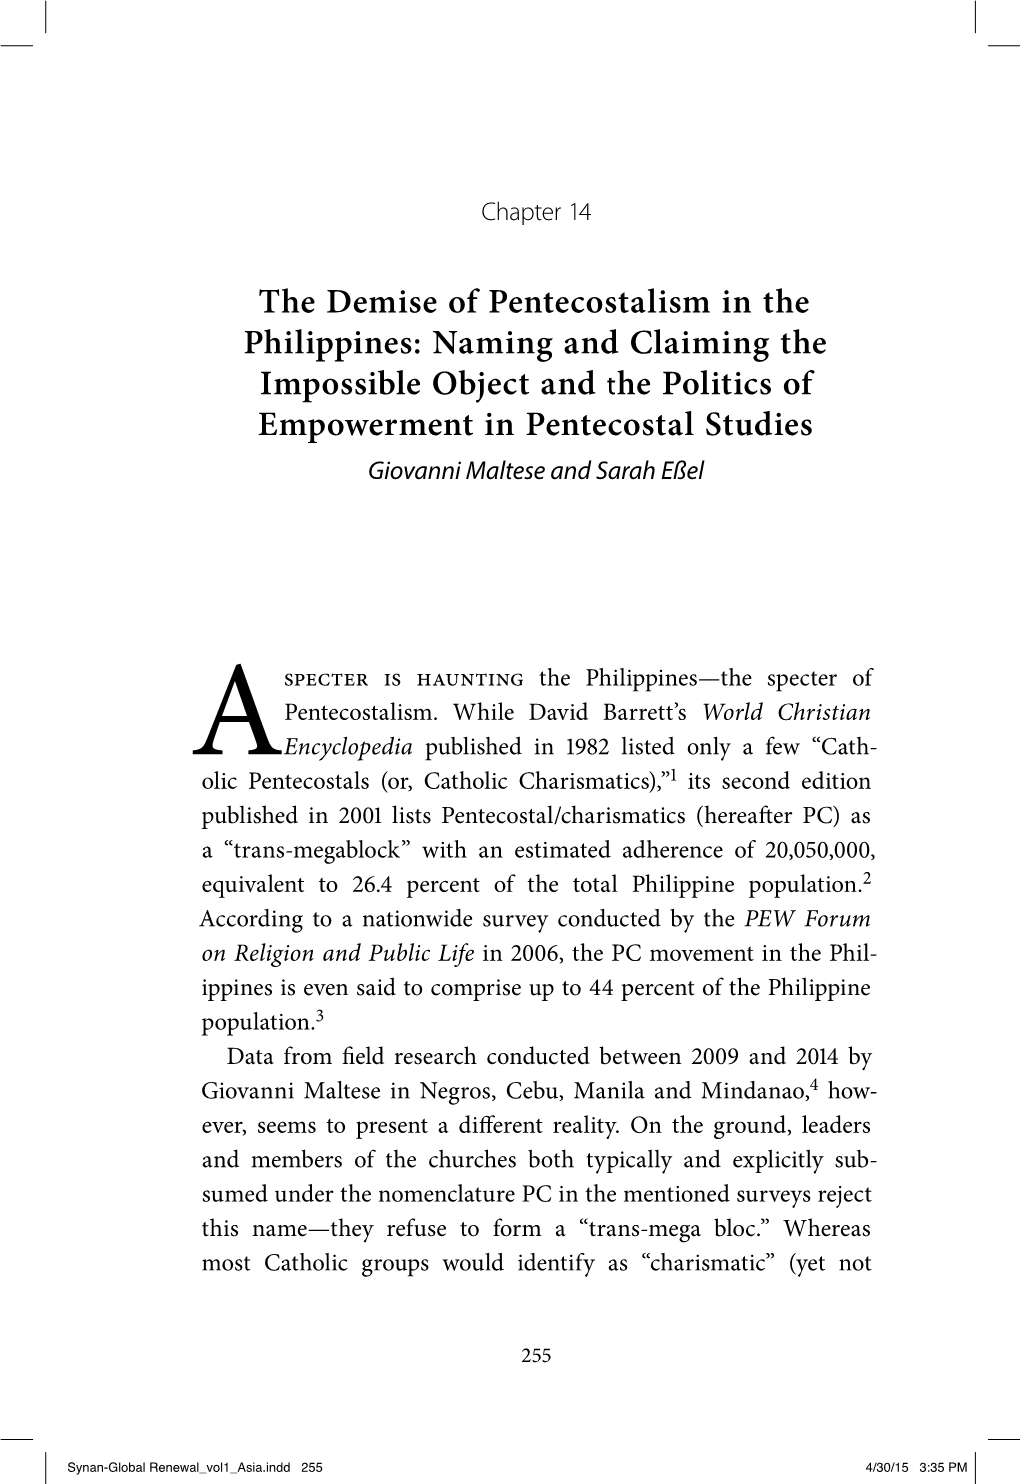 The Demise of Pentecostalism in the Philippines: Naming and Claiming